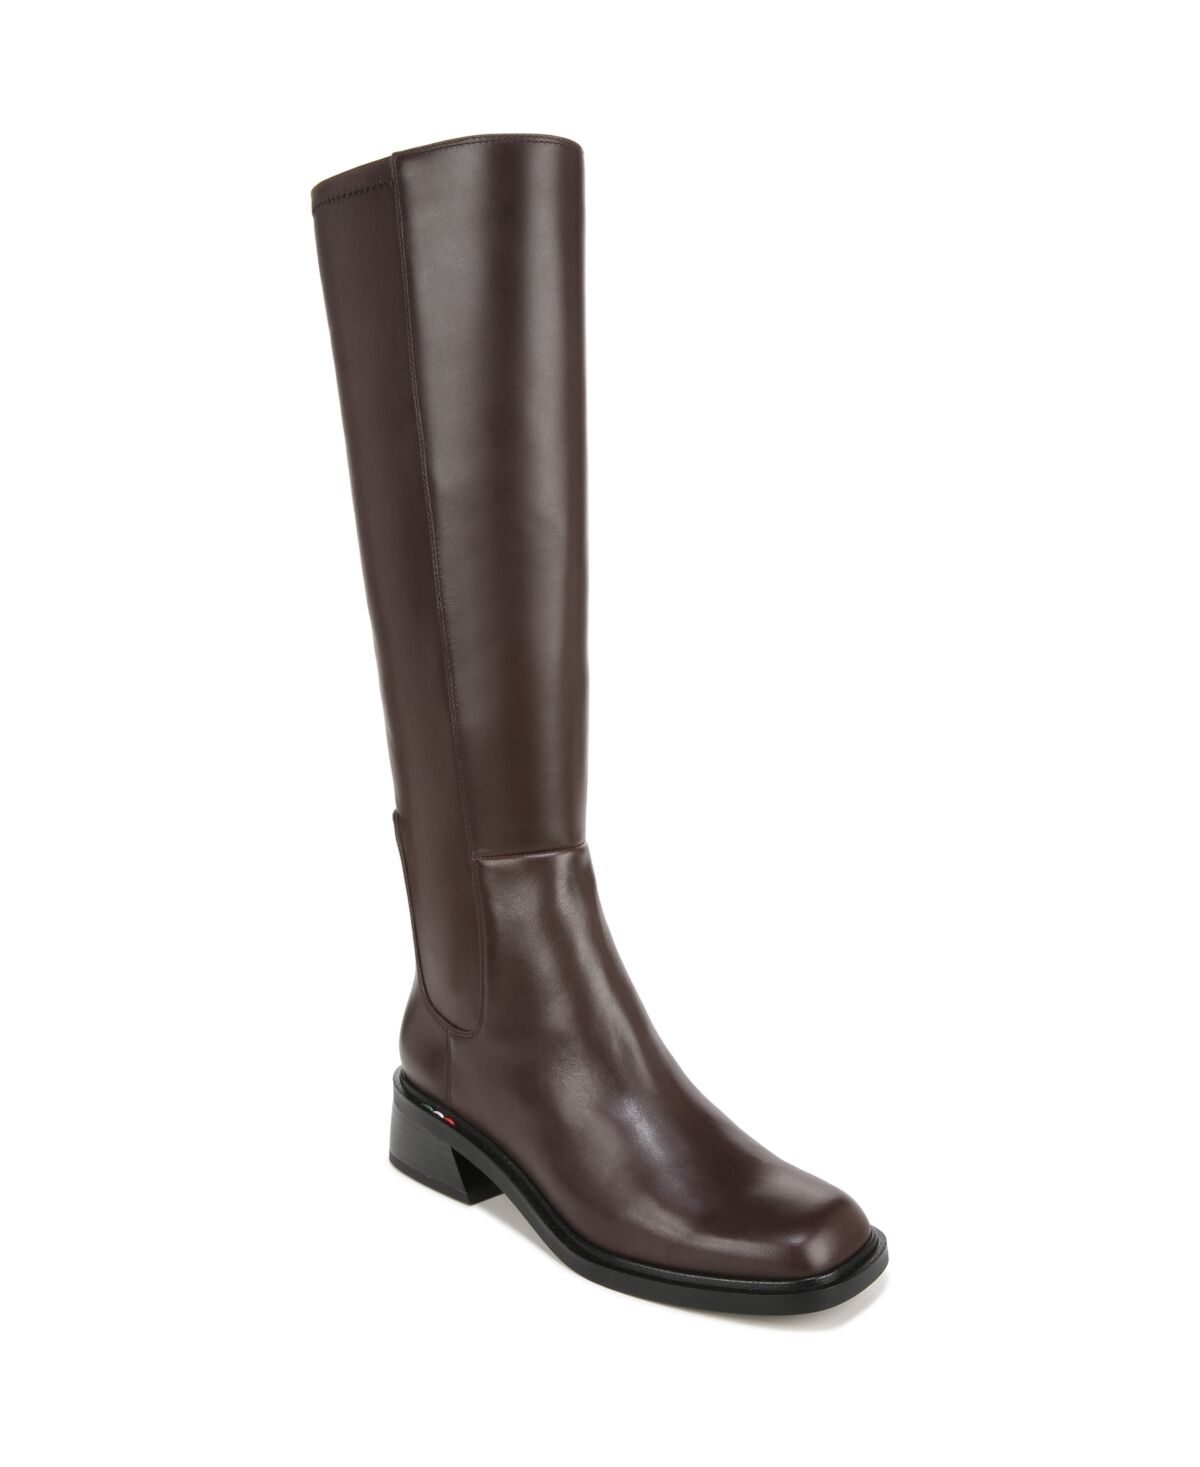 Franco Sarto Giselle Square Toe Knee High Boots - Castagno Brown Leather